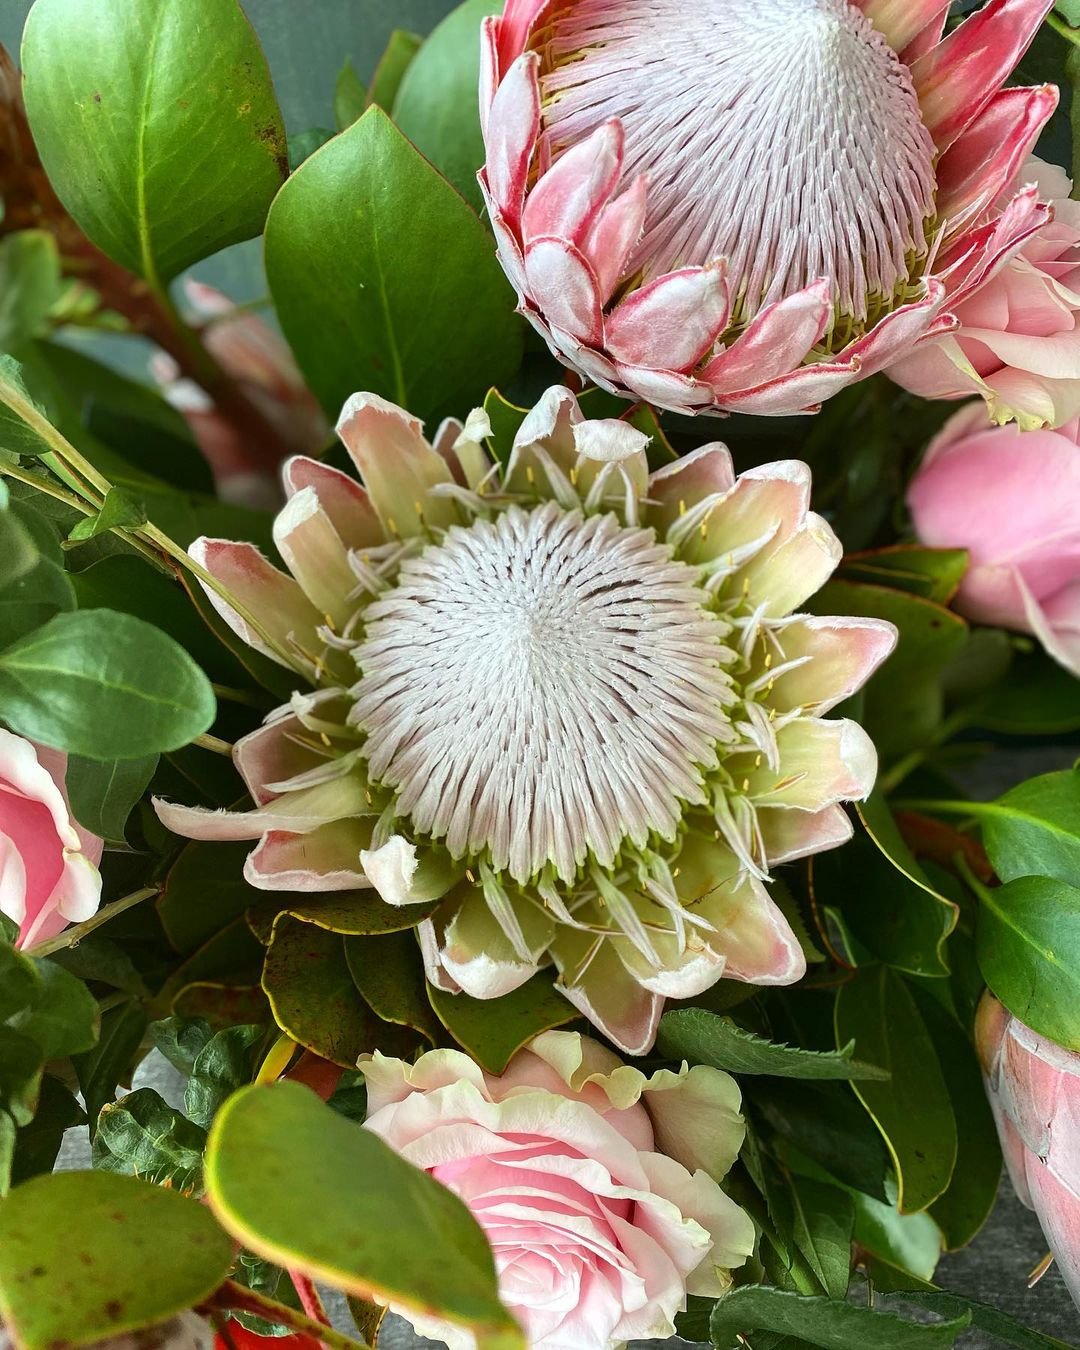 A beautiful bouquet featuring proteas and various other flowers.